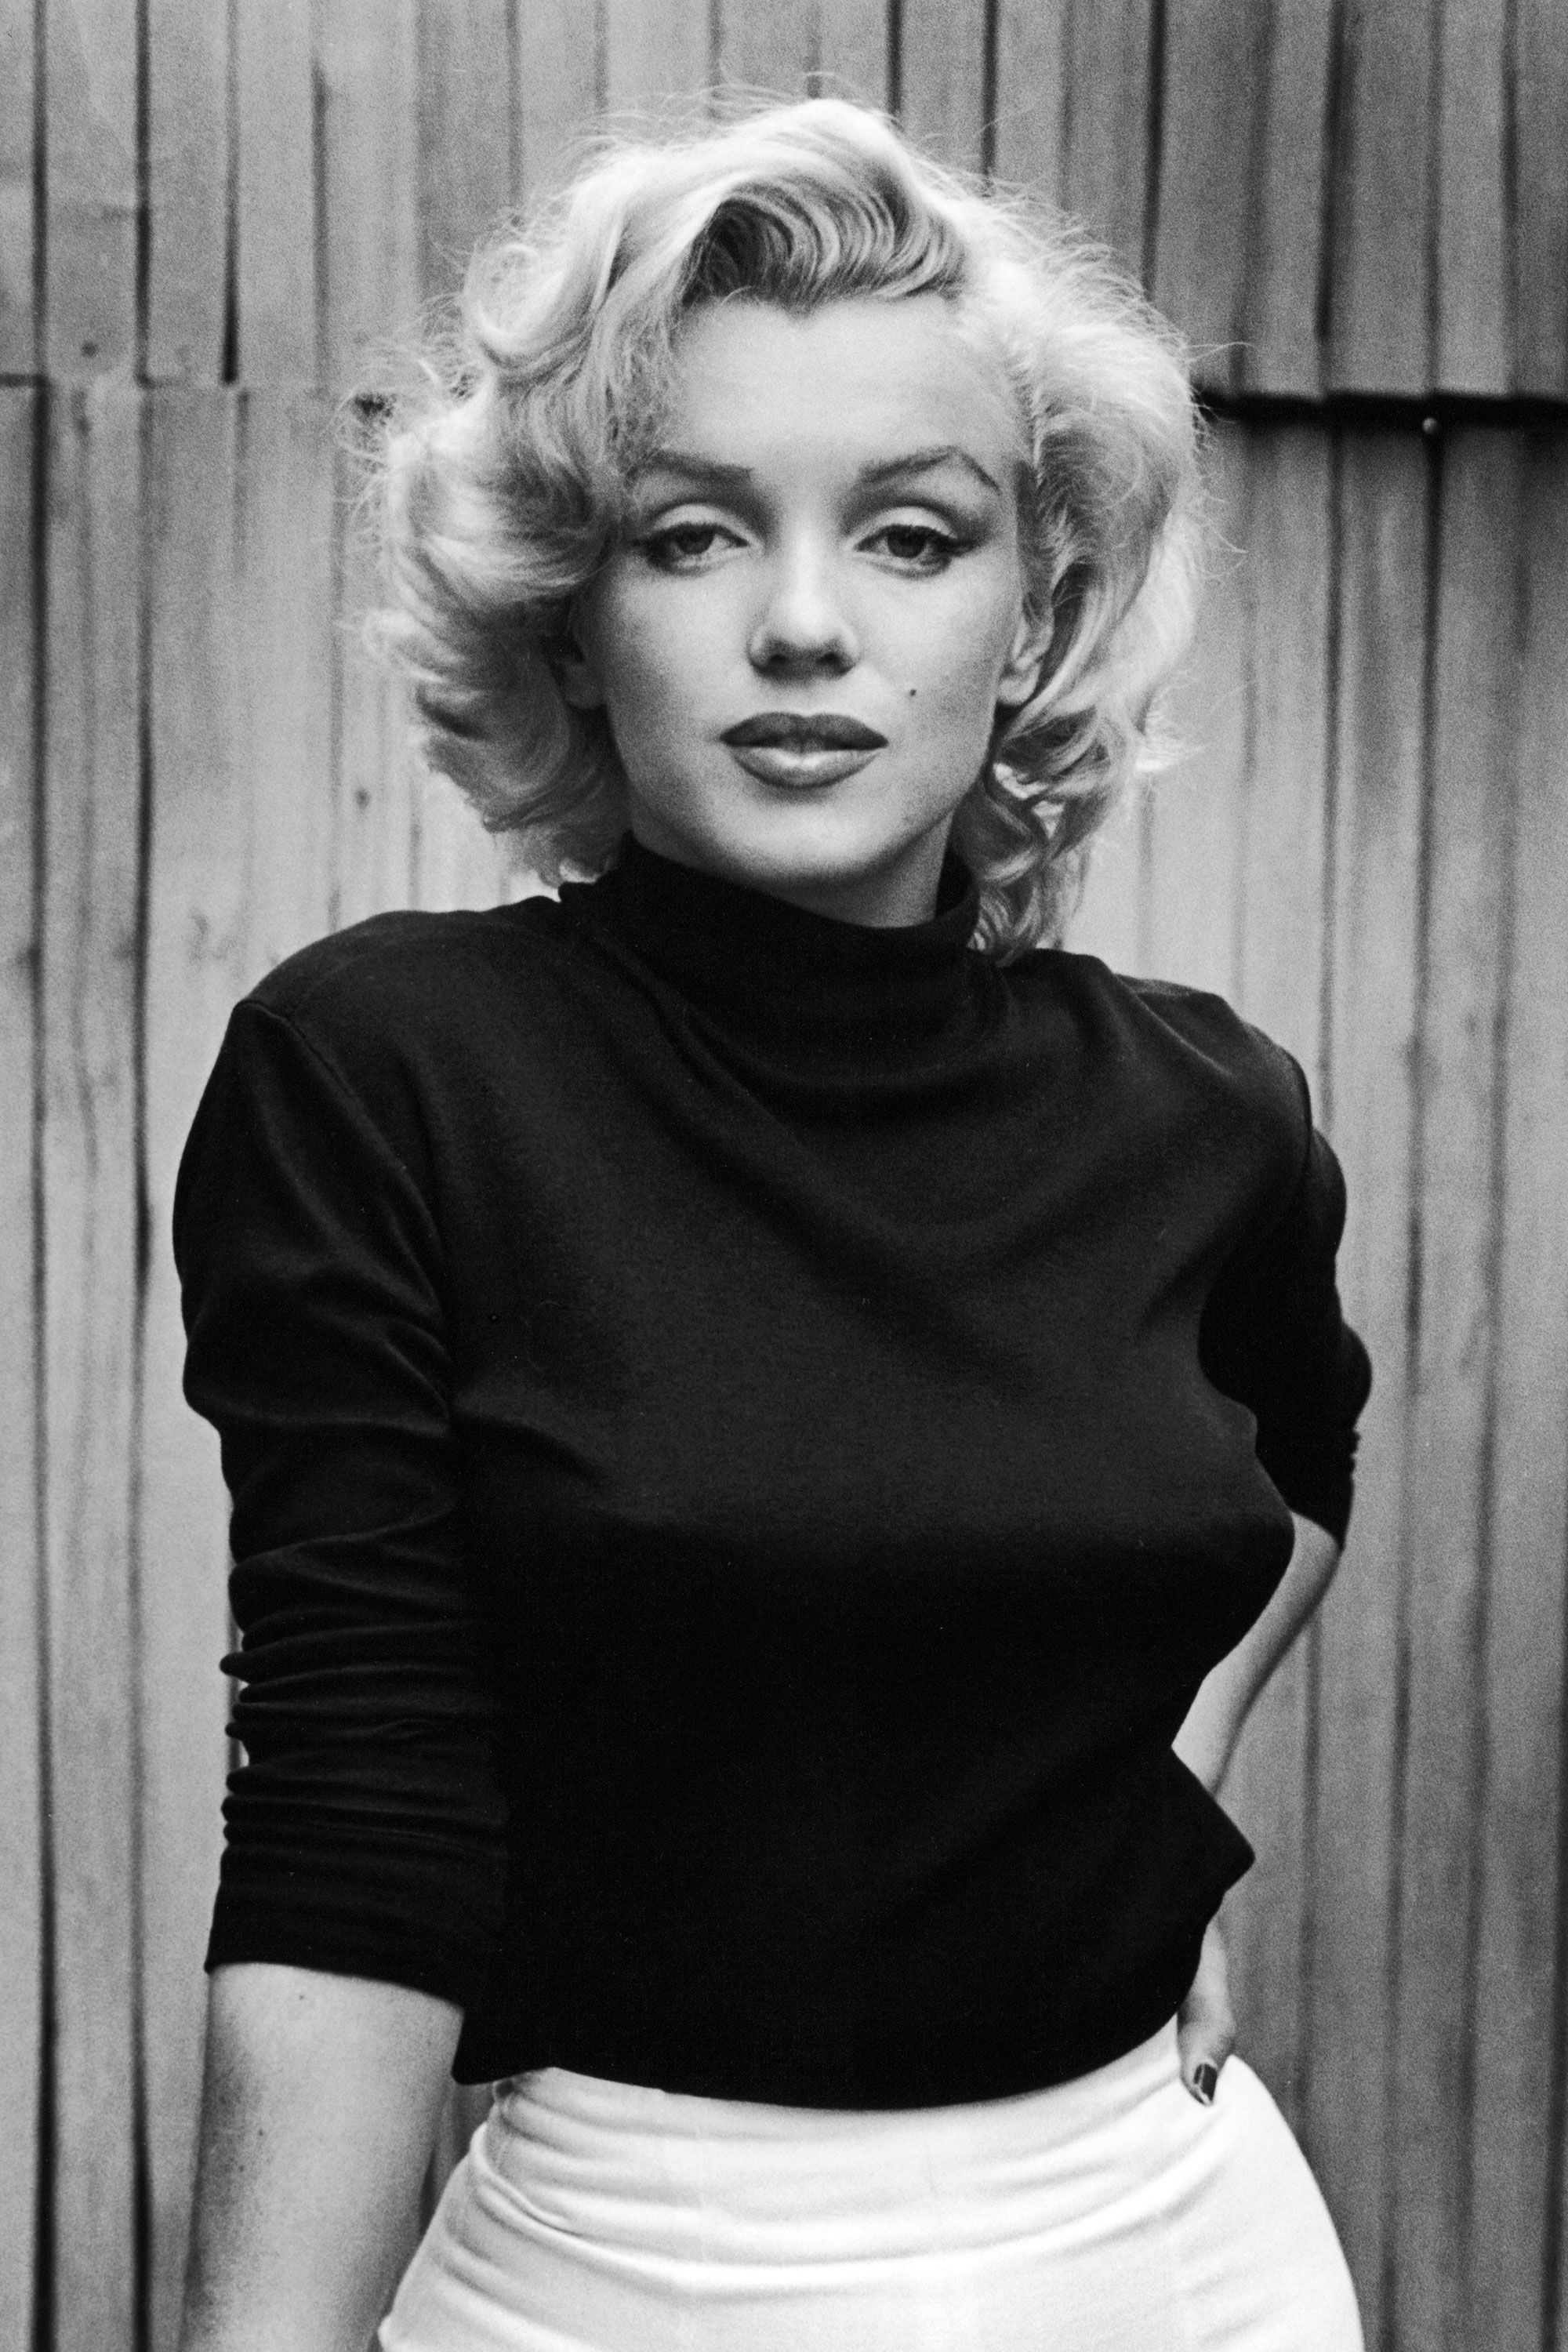 Marilyn Monroe is my IDOL because even tho she was curvy. had thighs and stretch marks. She is known as on